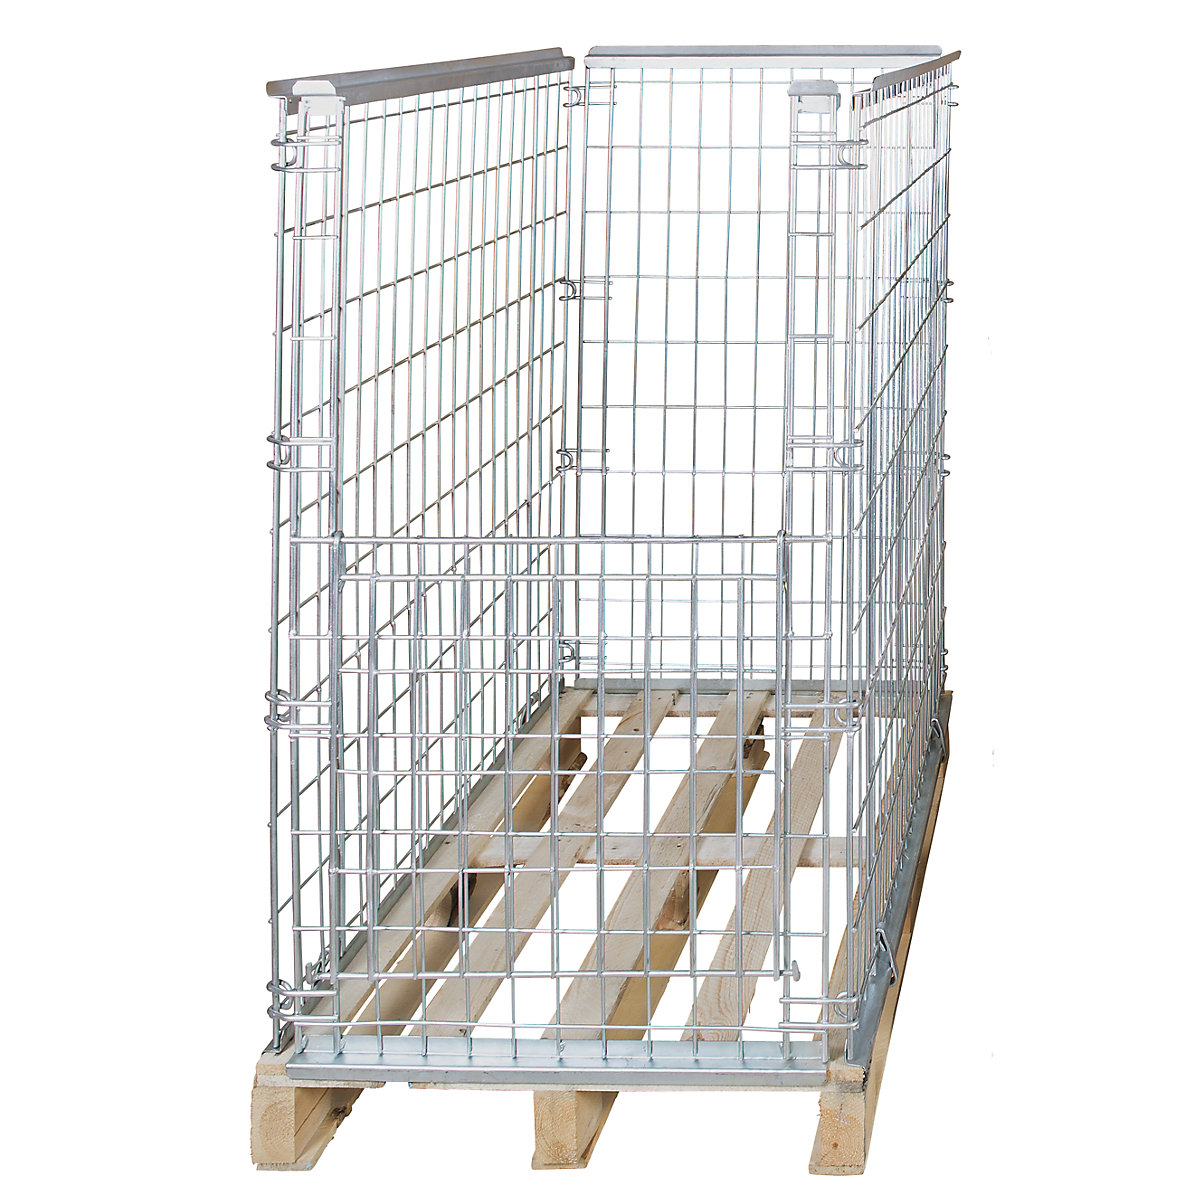 Mesh stacking frame for EURO pallet, with drop gate on 1 front wall, effective height 1160 mm-1